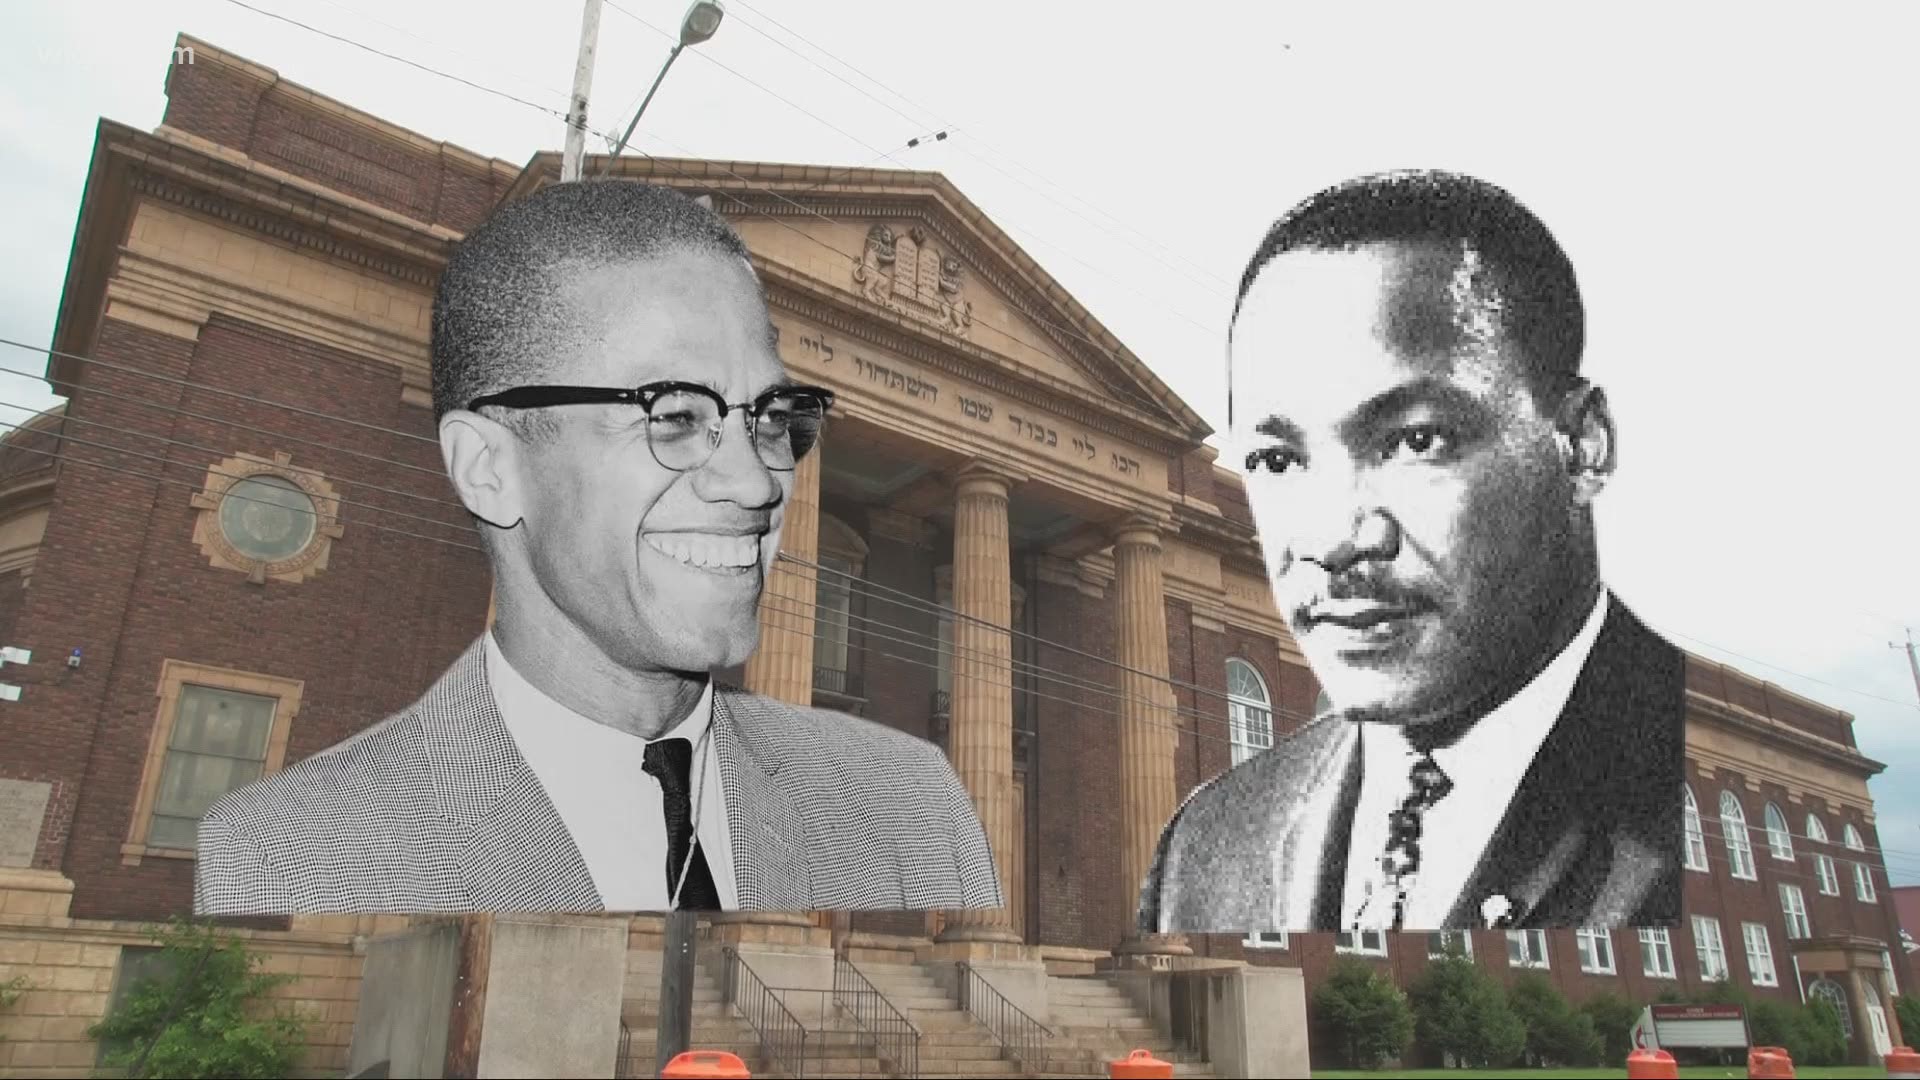 The trail will cover a roughly two-decade period. Glenville church, where both Martin Luther King, Jr. and Malcolm X spoke, is one of many sites being reviewed.